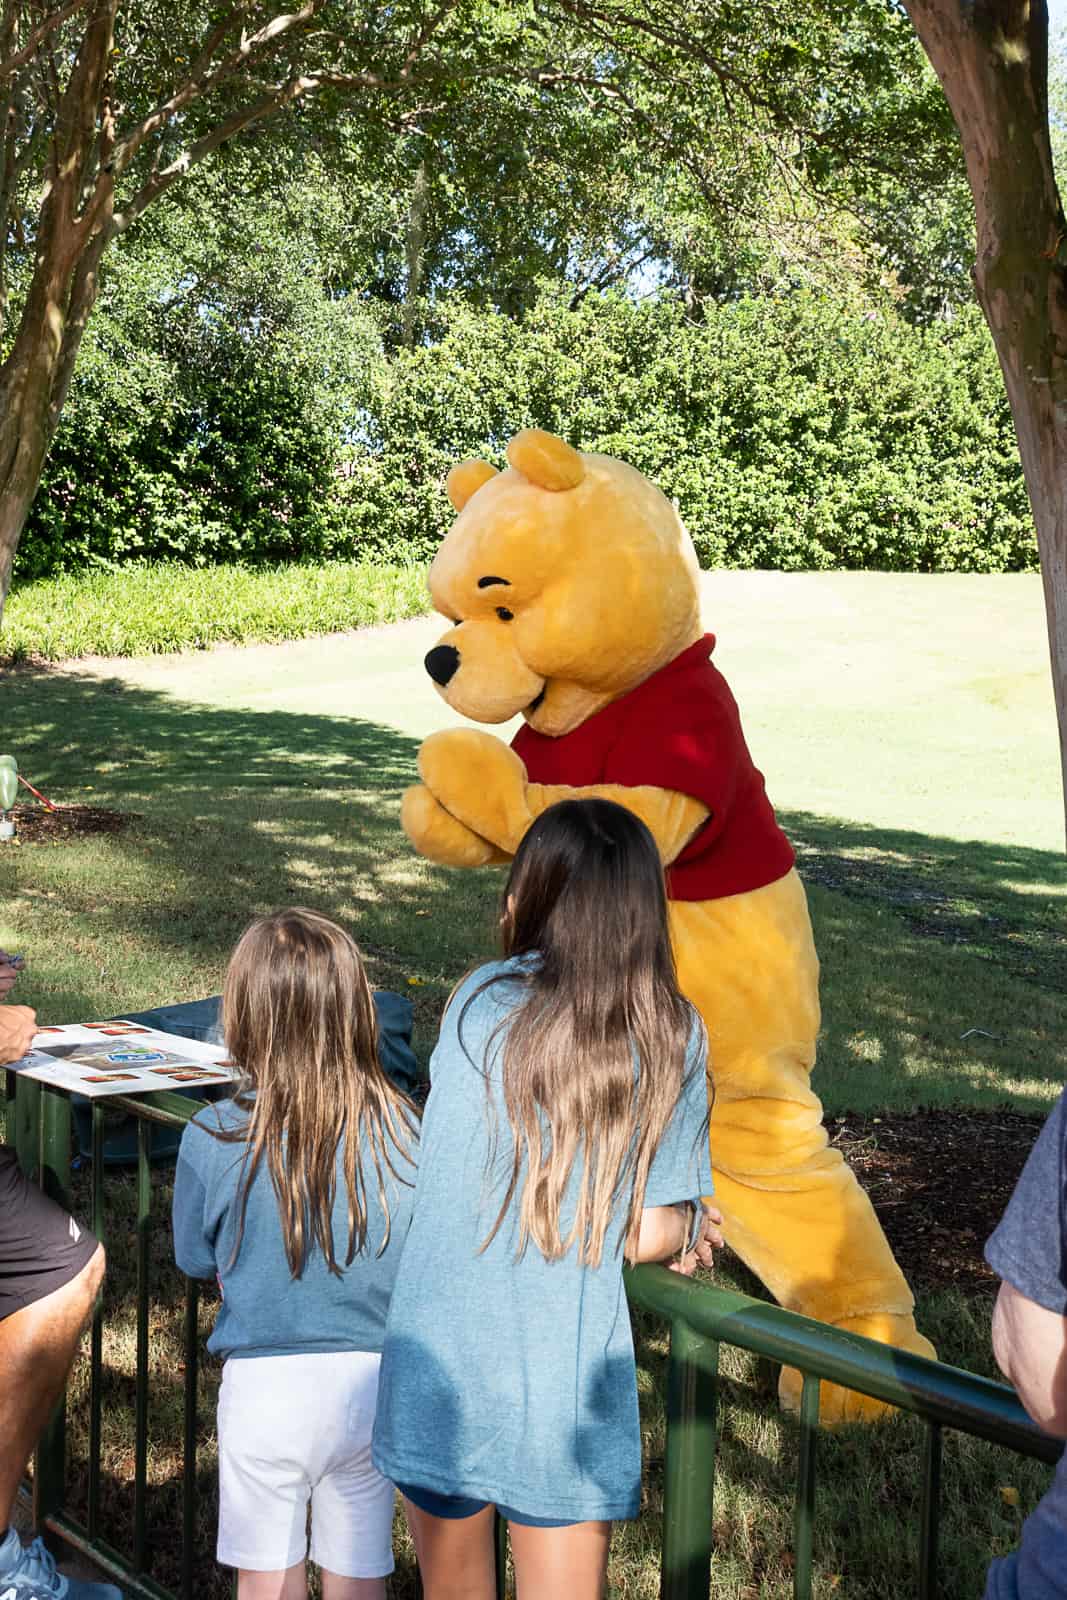 Meeting Winnie The Pooh in Epcot